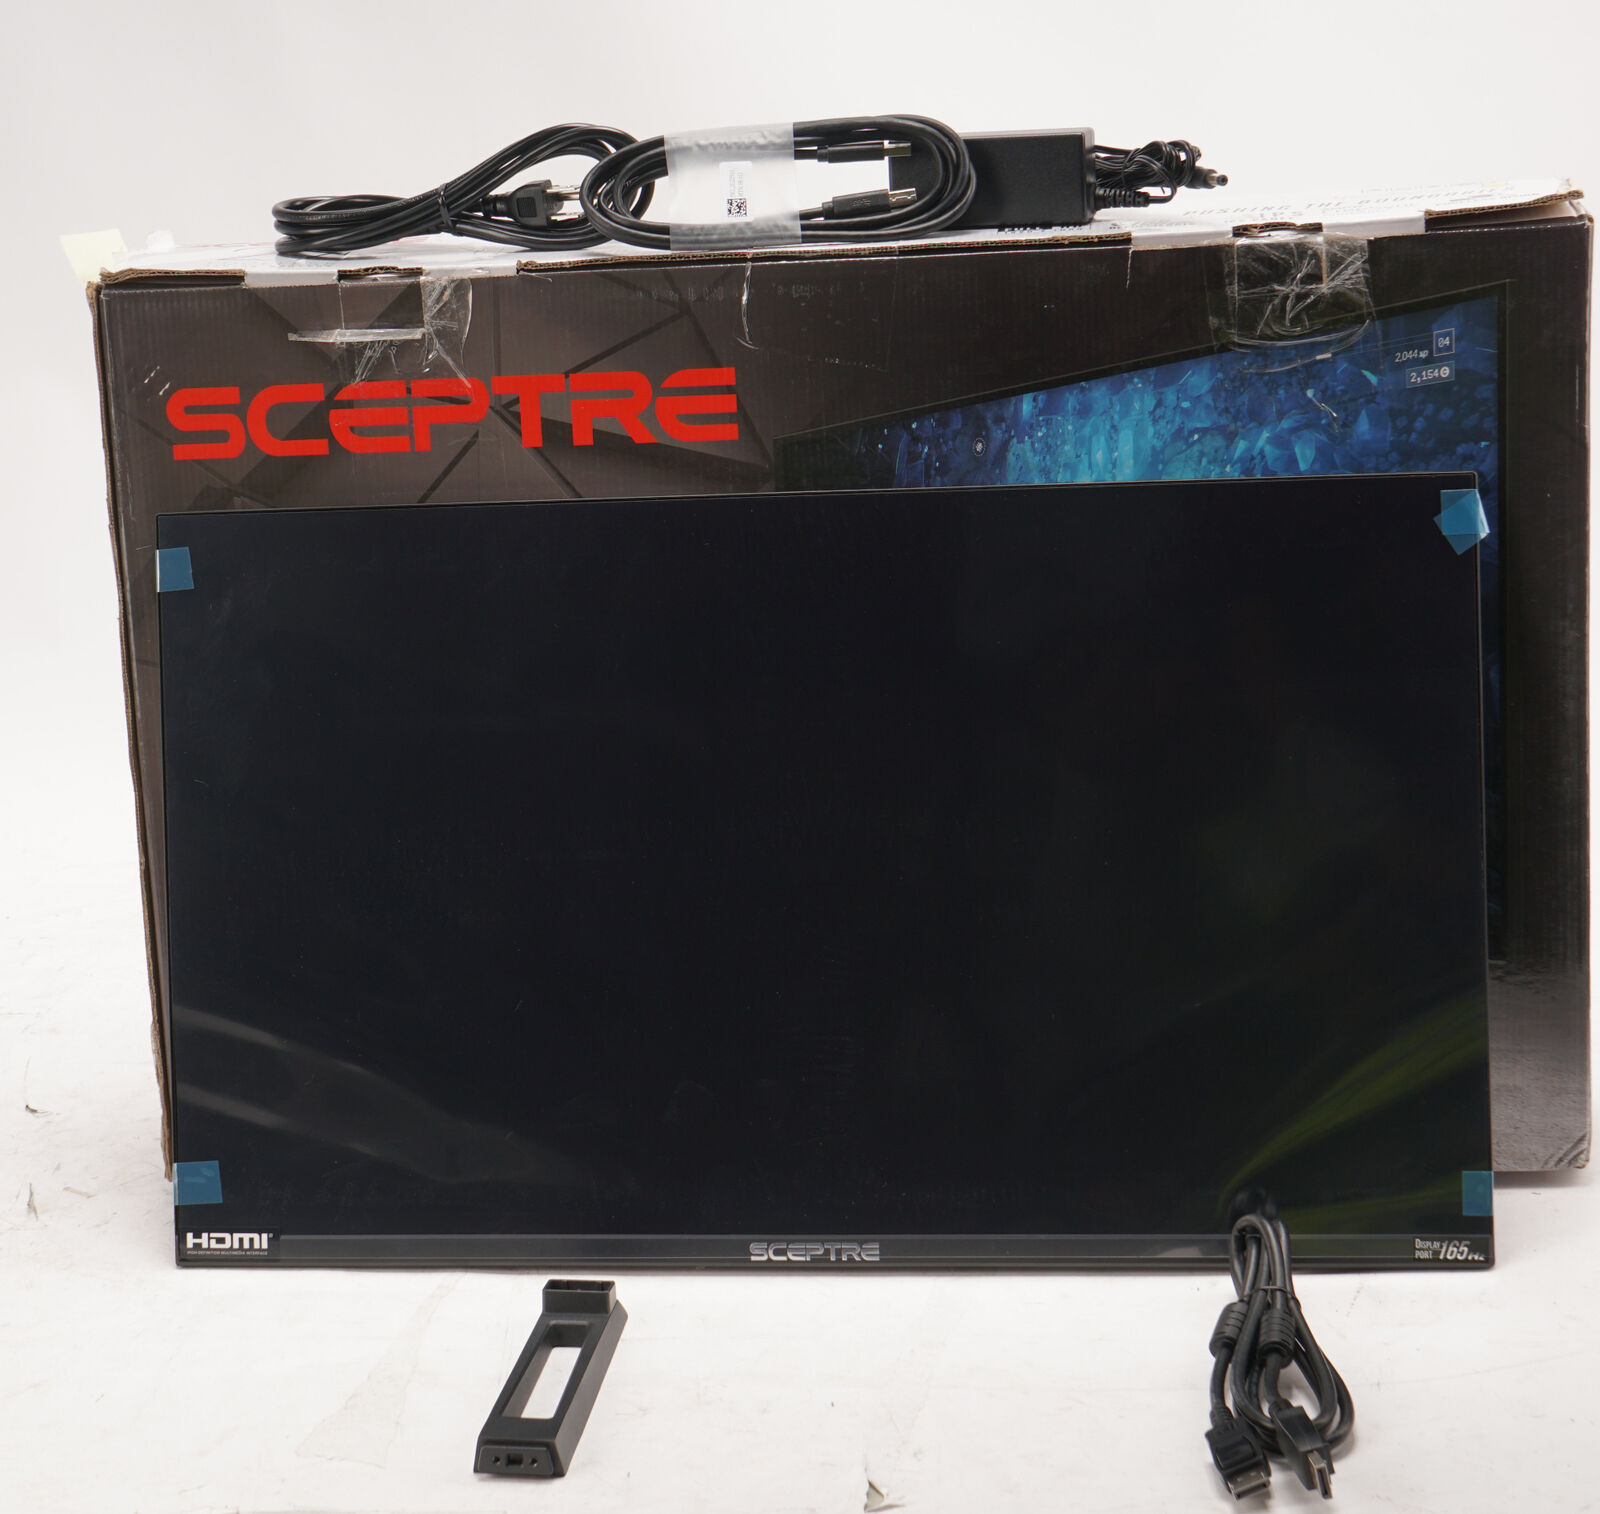 Sceptre 27 Inch FHD 1080p IPS Gaming LED Edgeless Wall Mountable Monitor Black